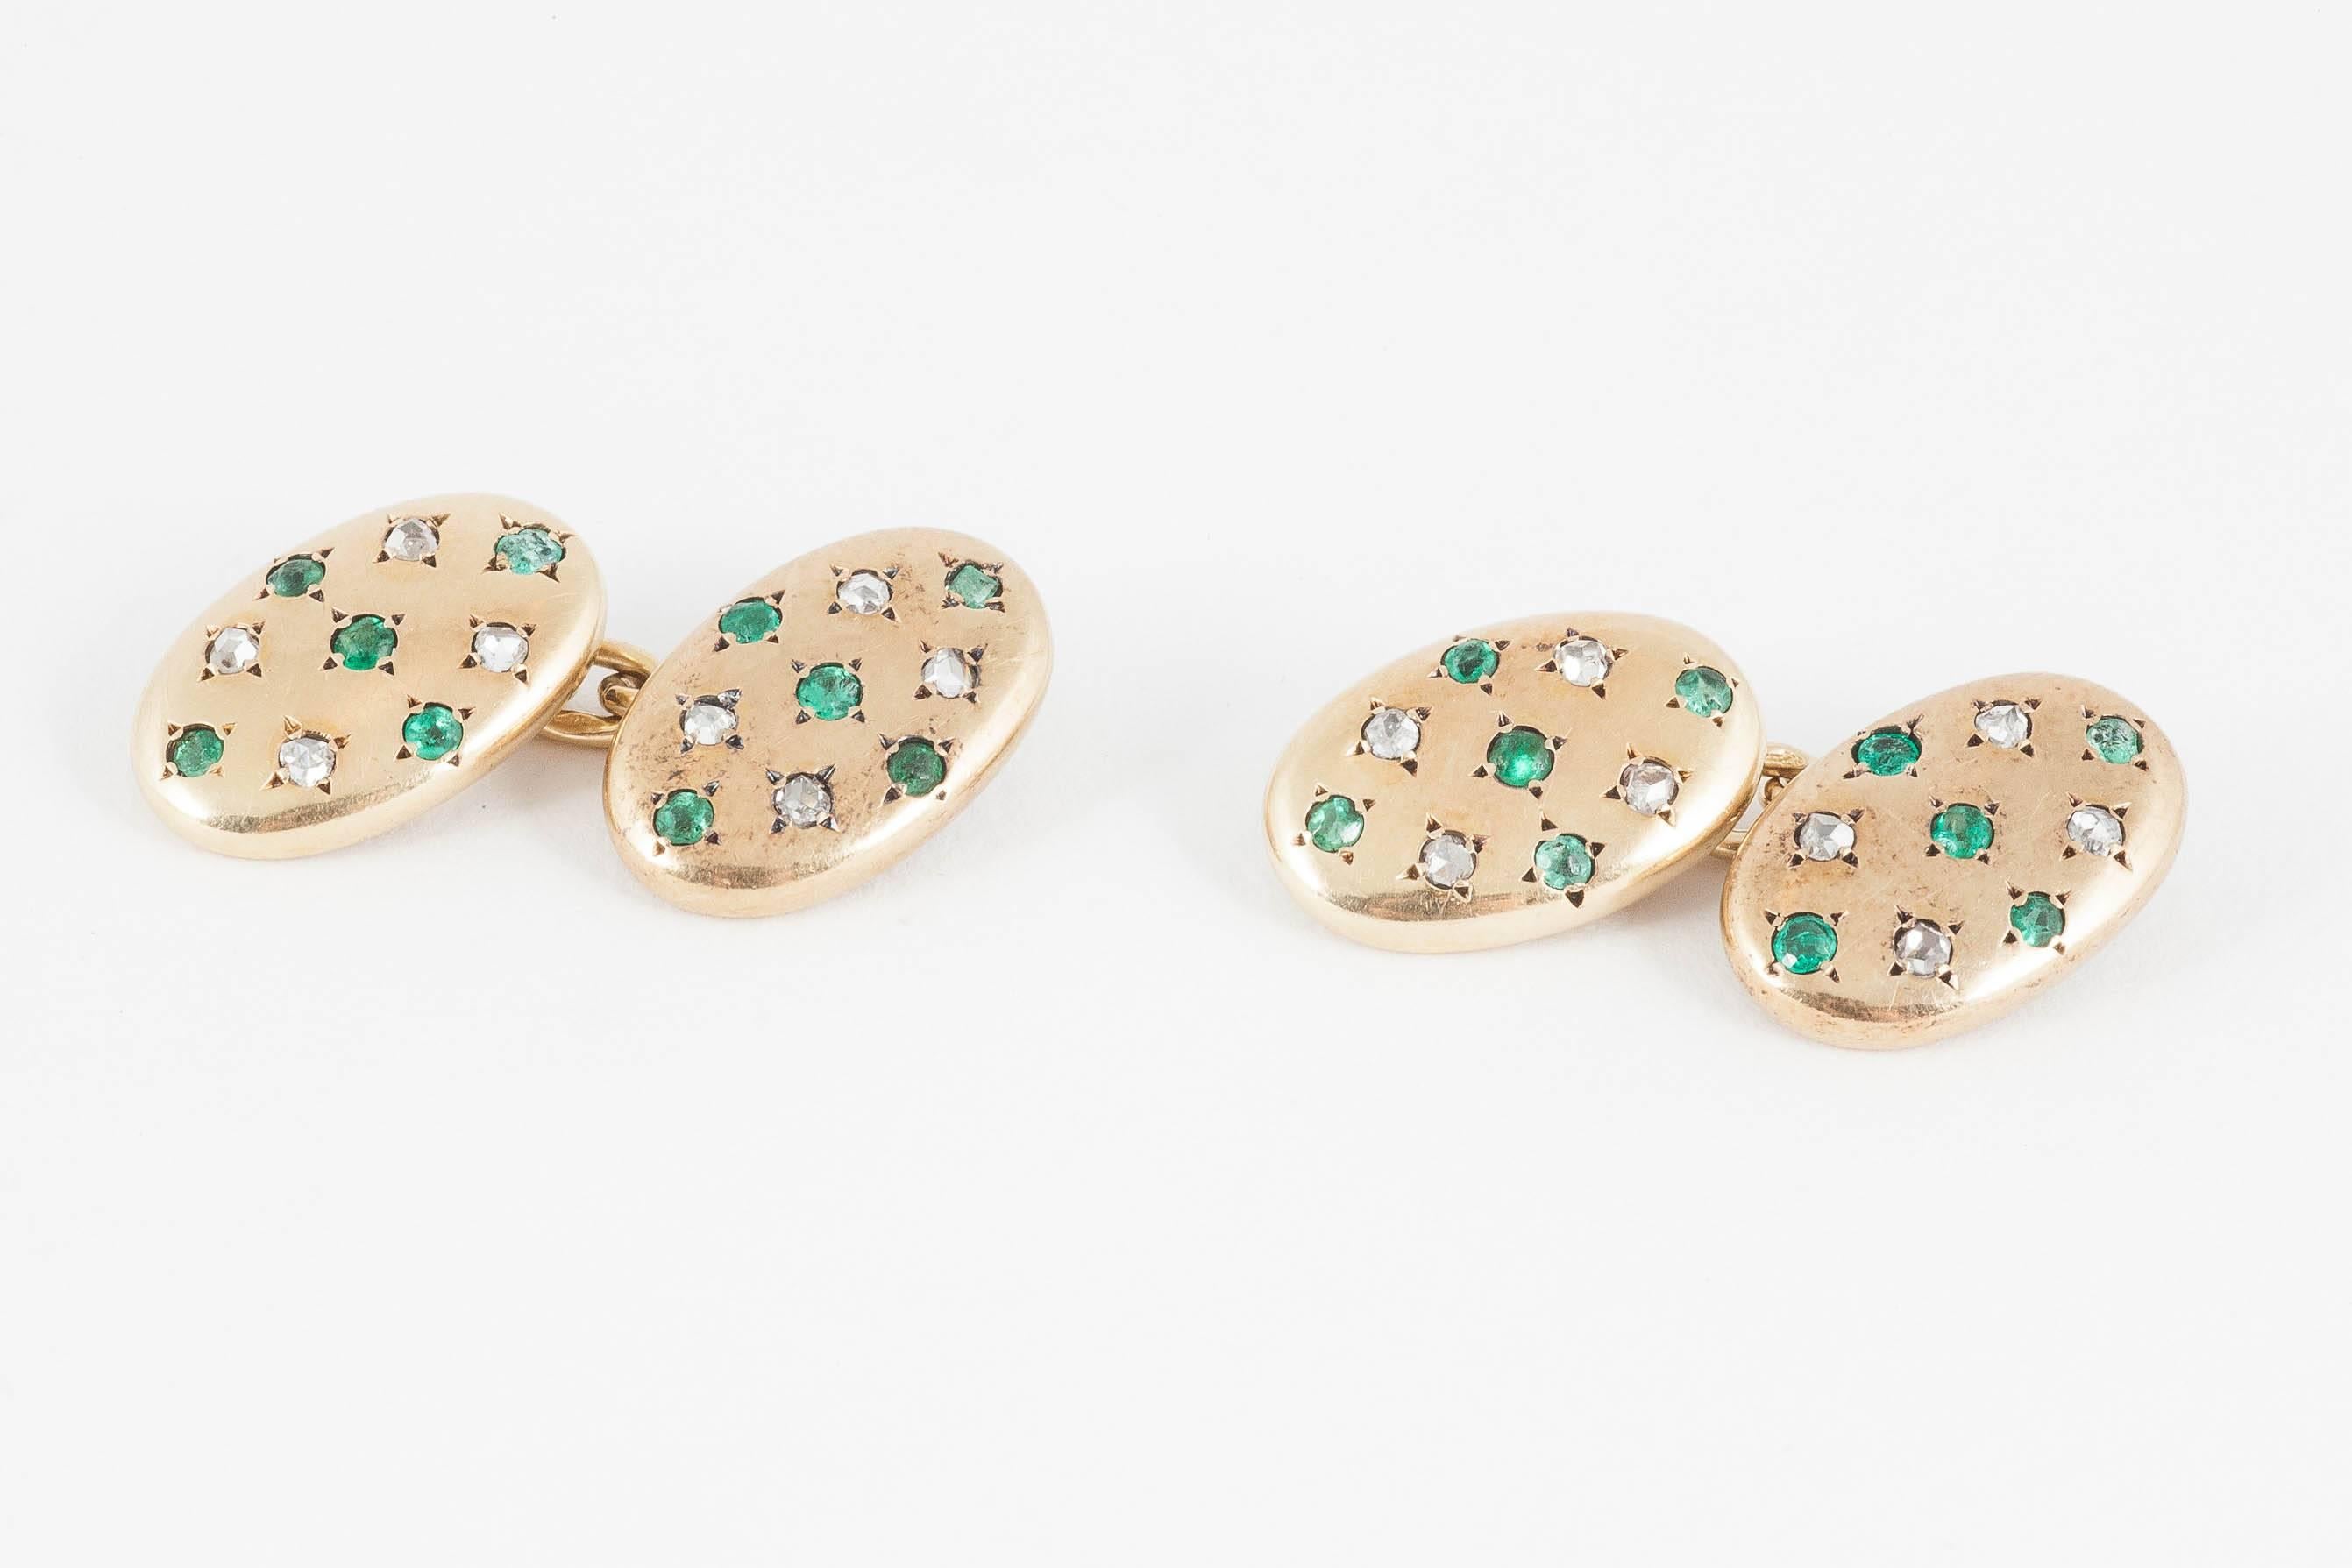 Double sided cufflinks in 18 karat yellow gold, set with emeralds and rose-cut diamonds. Oval in shape with chain connections. French marks.
Measures 16mm in length x 10mm in width.
Antique (over 100 years old),
Early 20th century, French circa